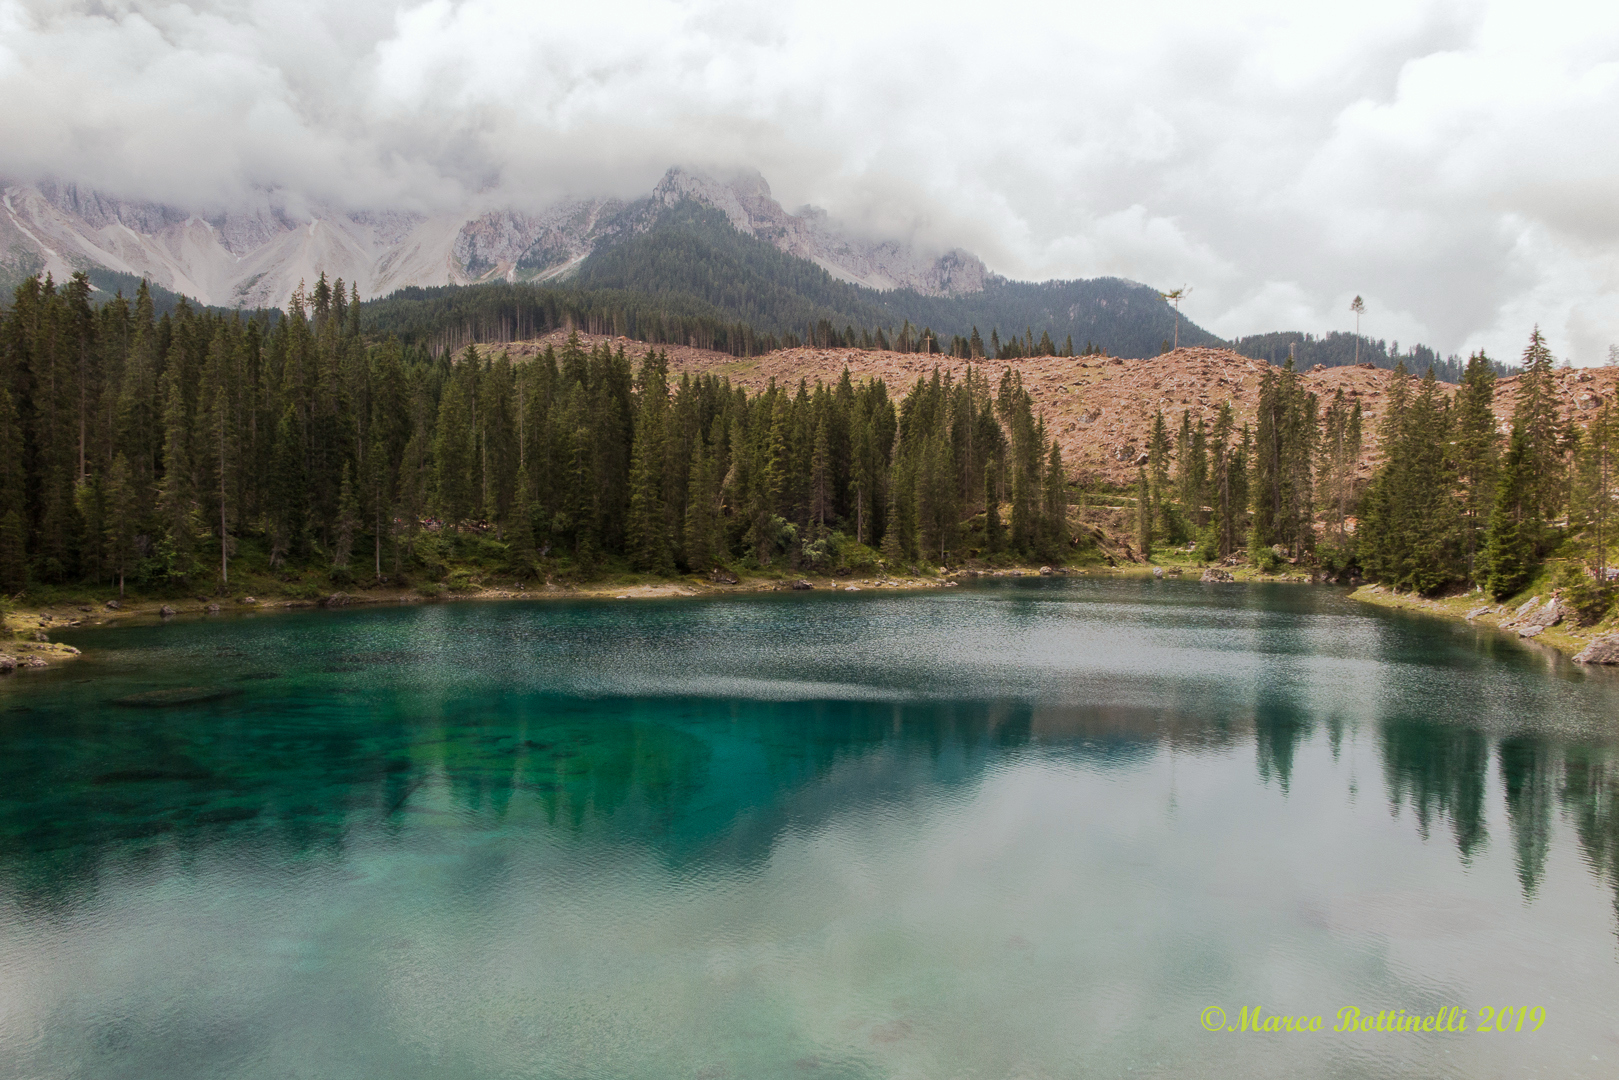 This is what Lake Carezza looks like today......